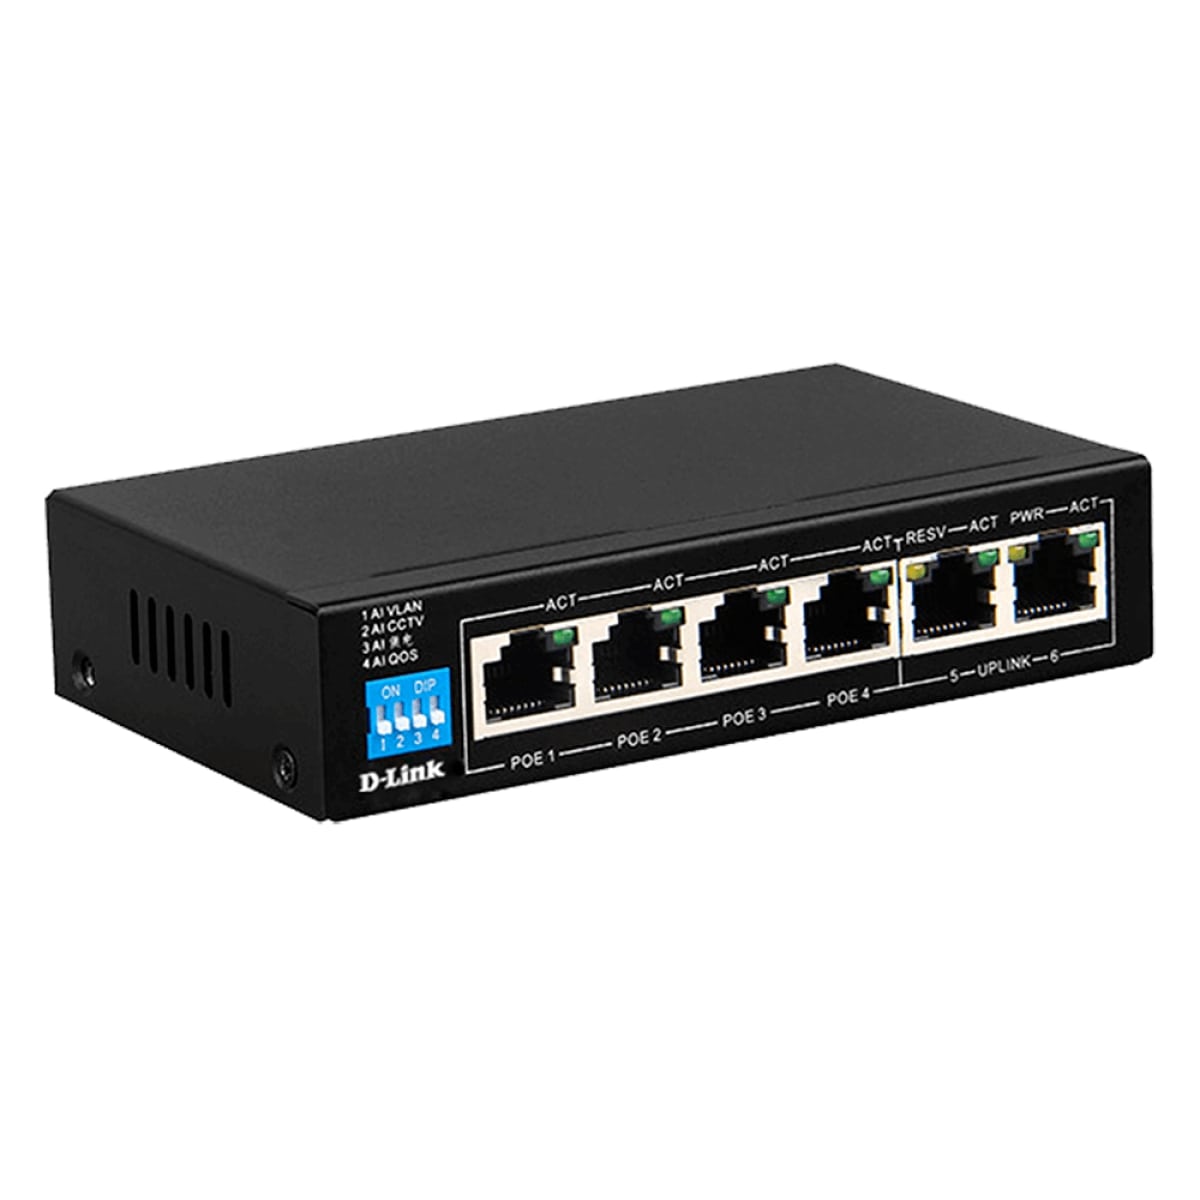 D-Link DGS-F1006P-E 6-Port 10/100/1000 Switch with 4 PoE Ports and 2 Uplink Ports